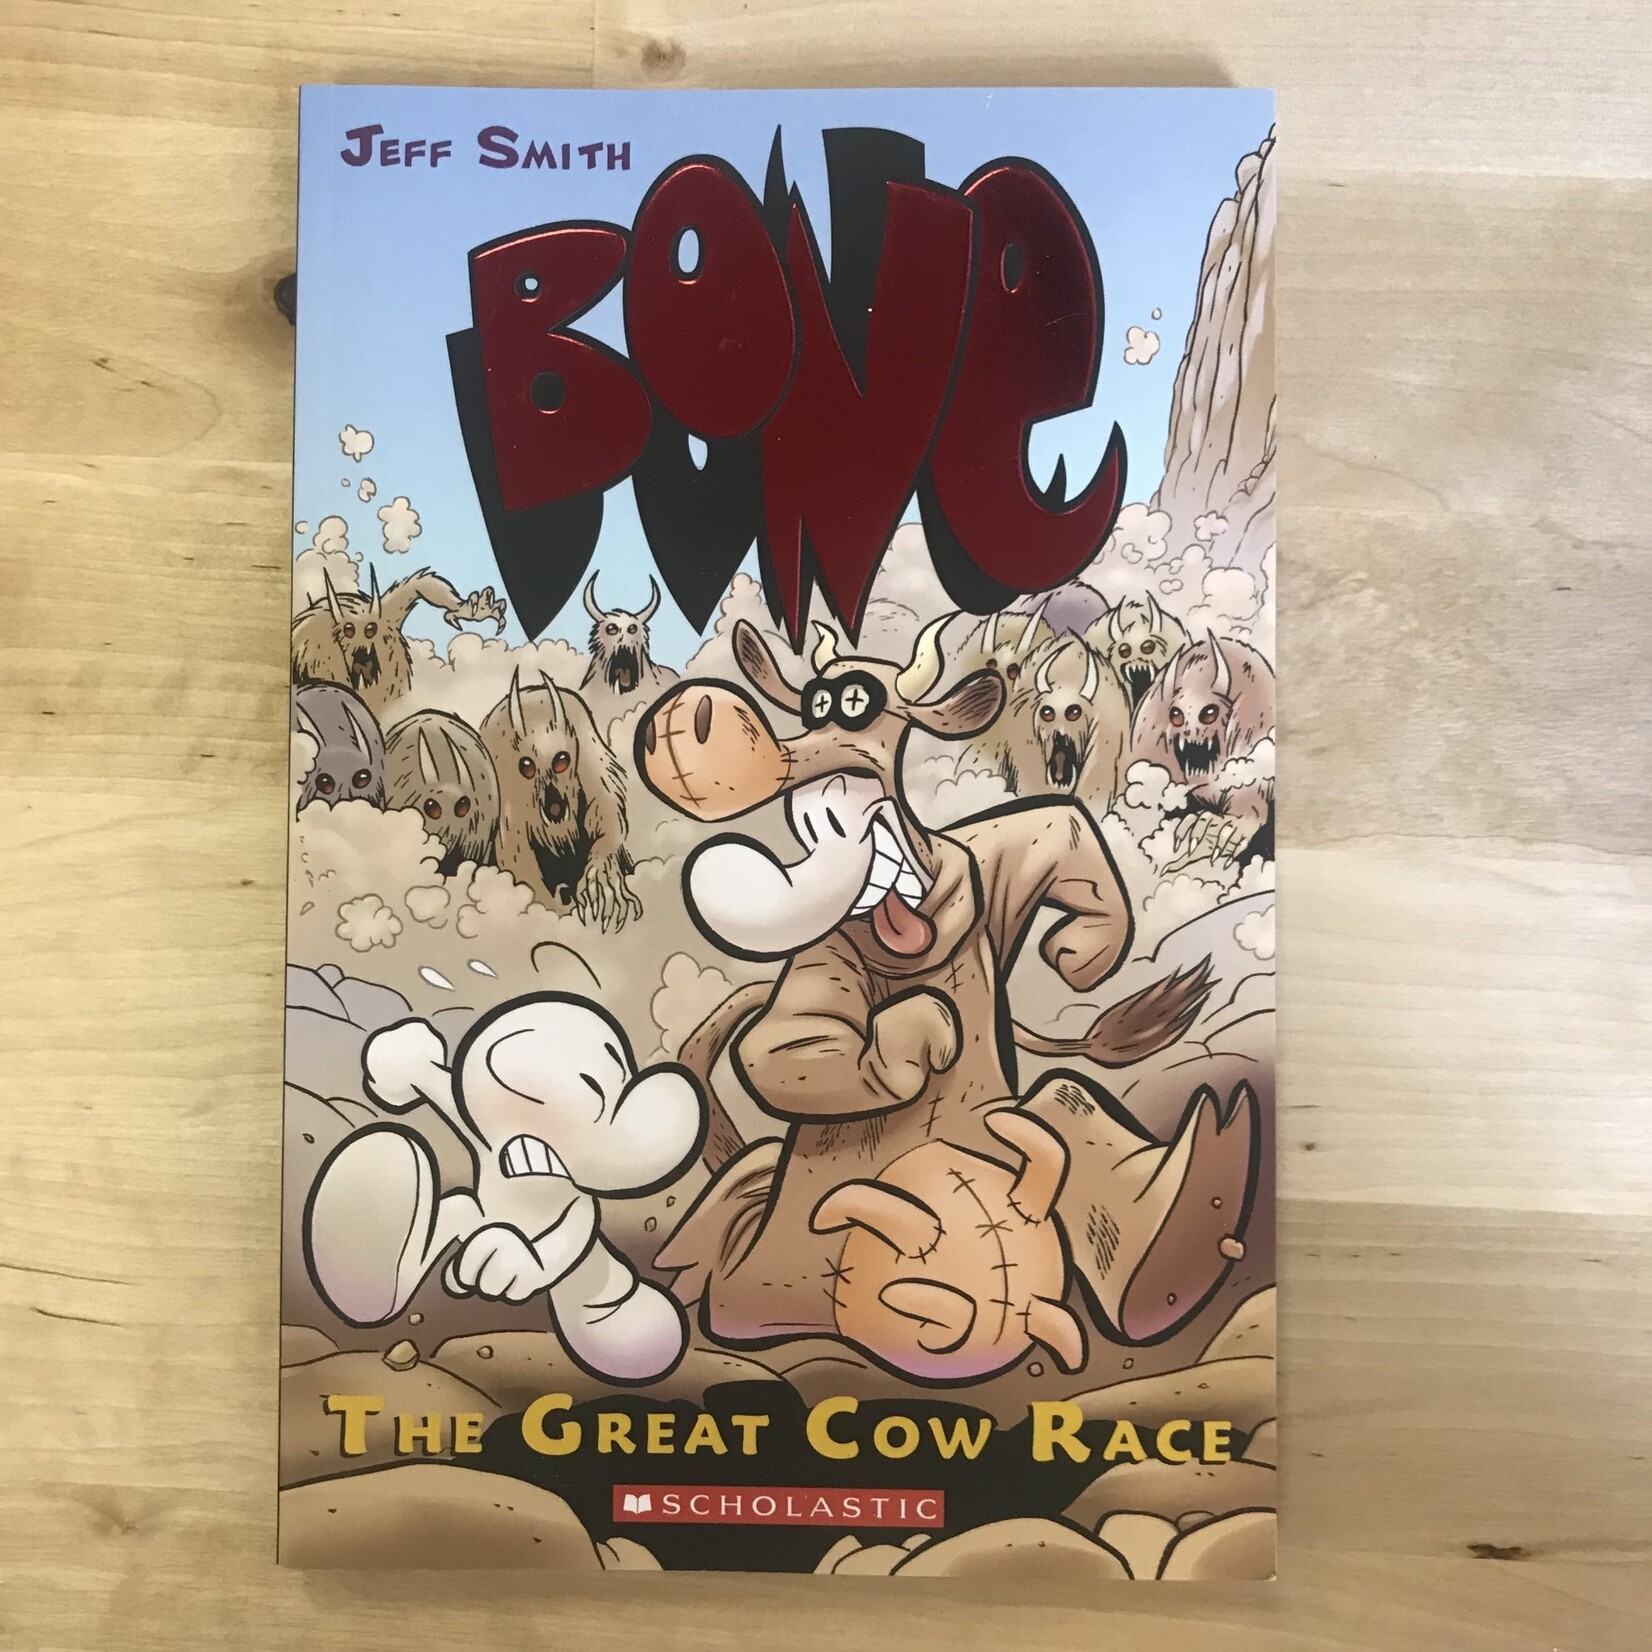 Jeff Smith - Bone - 2: The Great Cow Race - Paperback (USED)